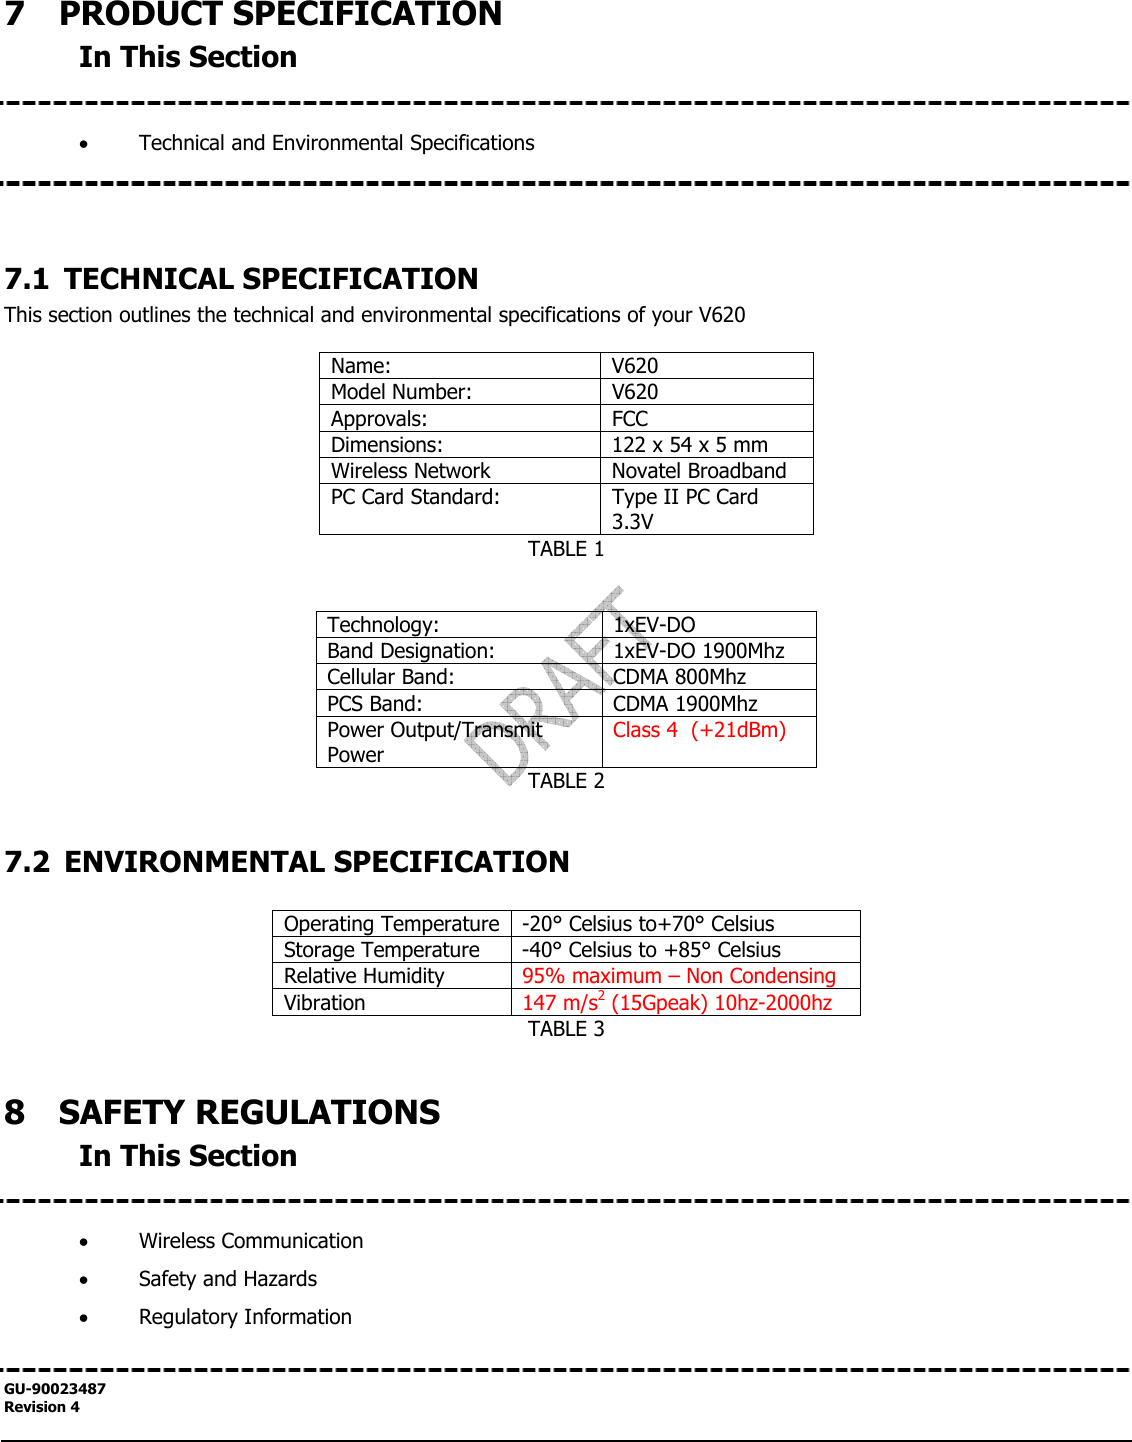  GU-90023487 Revision 4   7  PRODUCT SPECIFICATION In This Section   • Technical and Environmental Specifications     7.1 TECHNICAL SPECIFICATION This section outlines the technical and environmental specifications of your V620  Name: V620 Model Number:  V620 Approvals: FCC  Dimensions:  122 x 54 x 5 mm Wireless Network  Novatel Broadband PC Card Standard:  Type II PC Card 3.3V TABLE 1   Technology: 1xEV-DO Band Designation:  1xEV-DO 1900Mhz Cellular Band:  CDMA 800Mhz PCS Band:  CDMA 1900Mhz Power Output/Transmit Power Class 4  (+21dBm) TABLE 2  7.2 ENVIRONMENTAL SPECIFICATION  Operating Temperature -20° Celsius to+70° Celsius Storage Temperature  -40° Celsius to +85° Celsius Relative Humidity  95% maximum – Non Condensing Vibration  147 m/s2 (15Gpeak) 10hz-2000hz TABLE 3  8  SAFETY REGULATIONS In This Section   • Wireless Communication • Safety and Hazards • Regulatory Information  